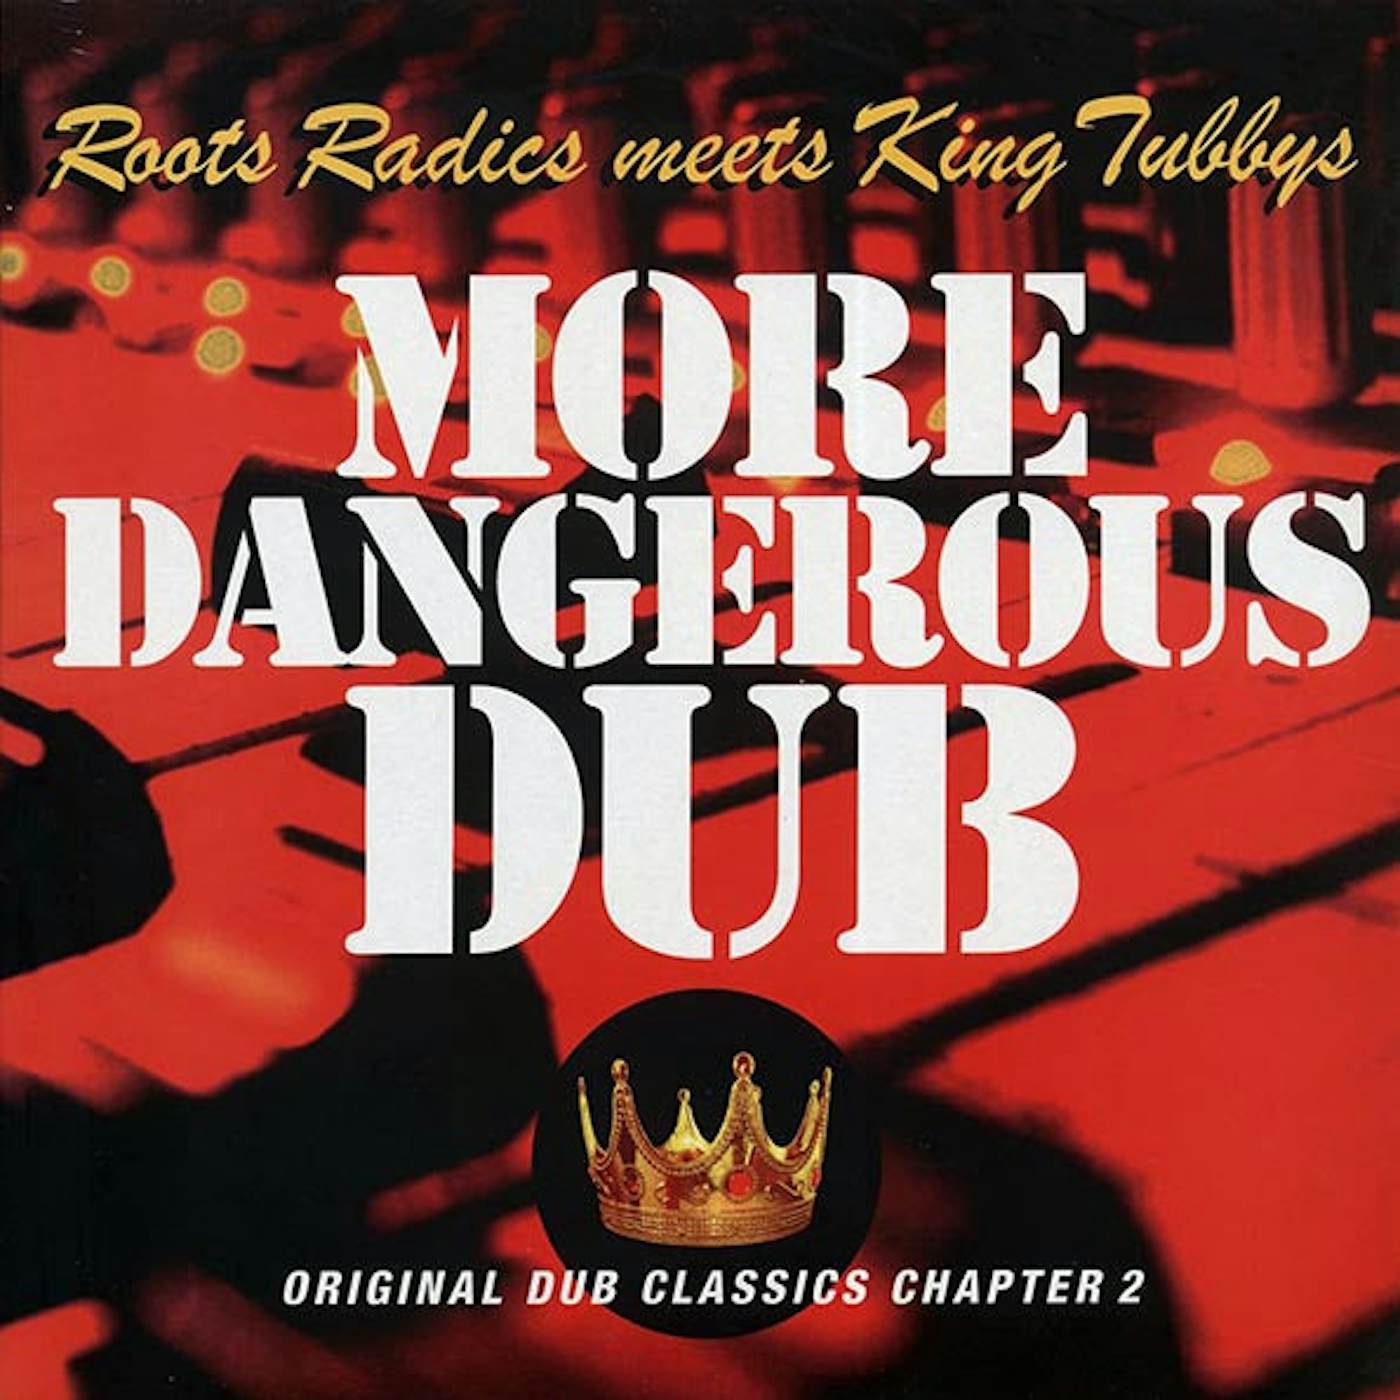 The Roots Radics, King Tubby  LP -  More Dangerous Dub: The Roots Radics Meet King Tubby (Vinyl)